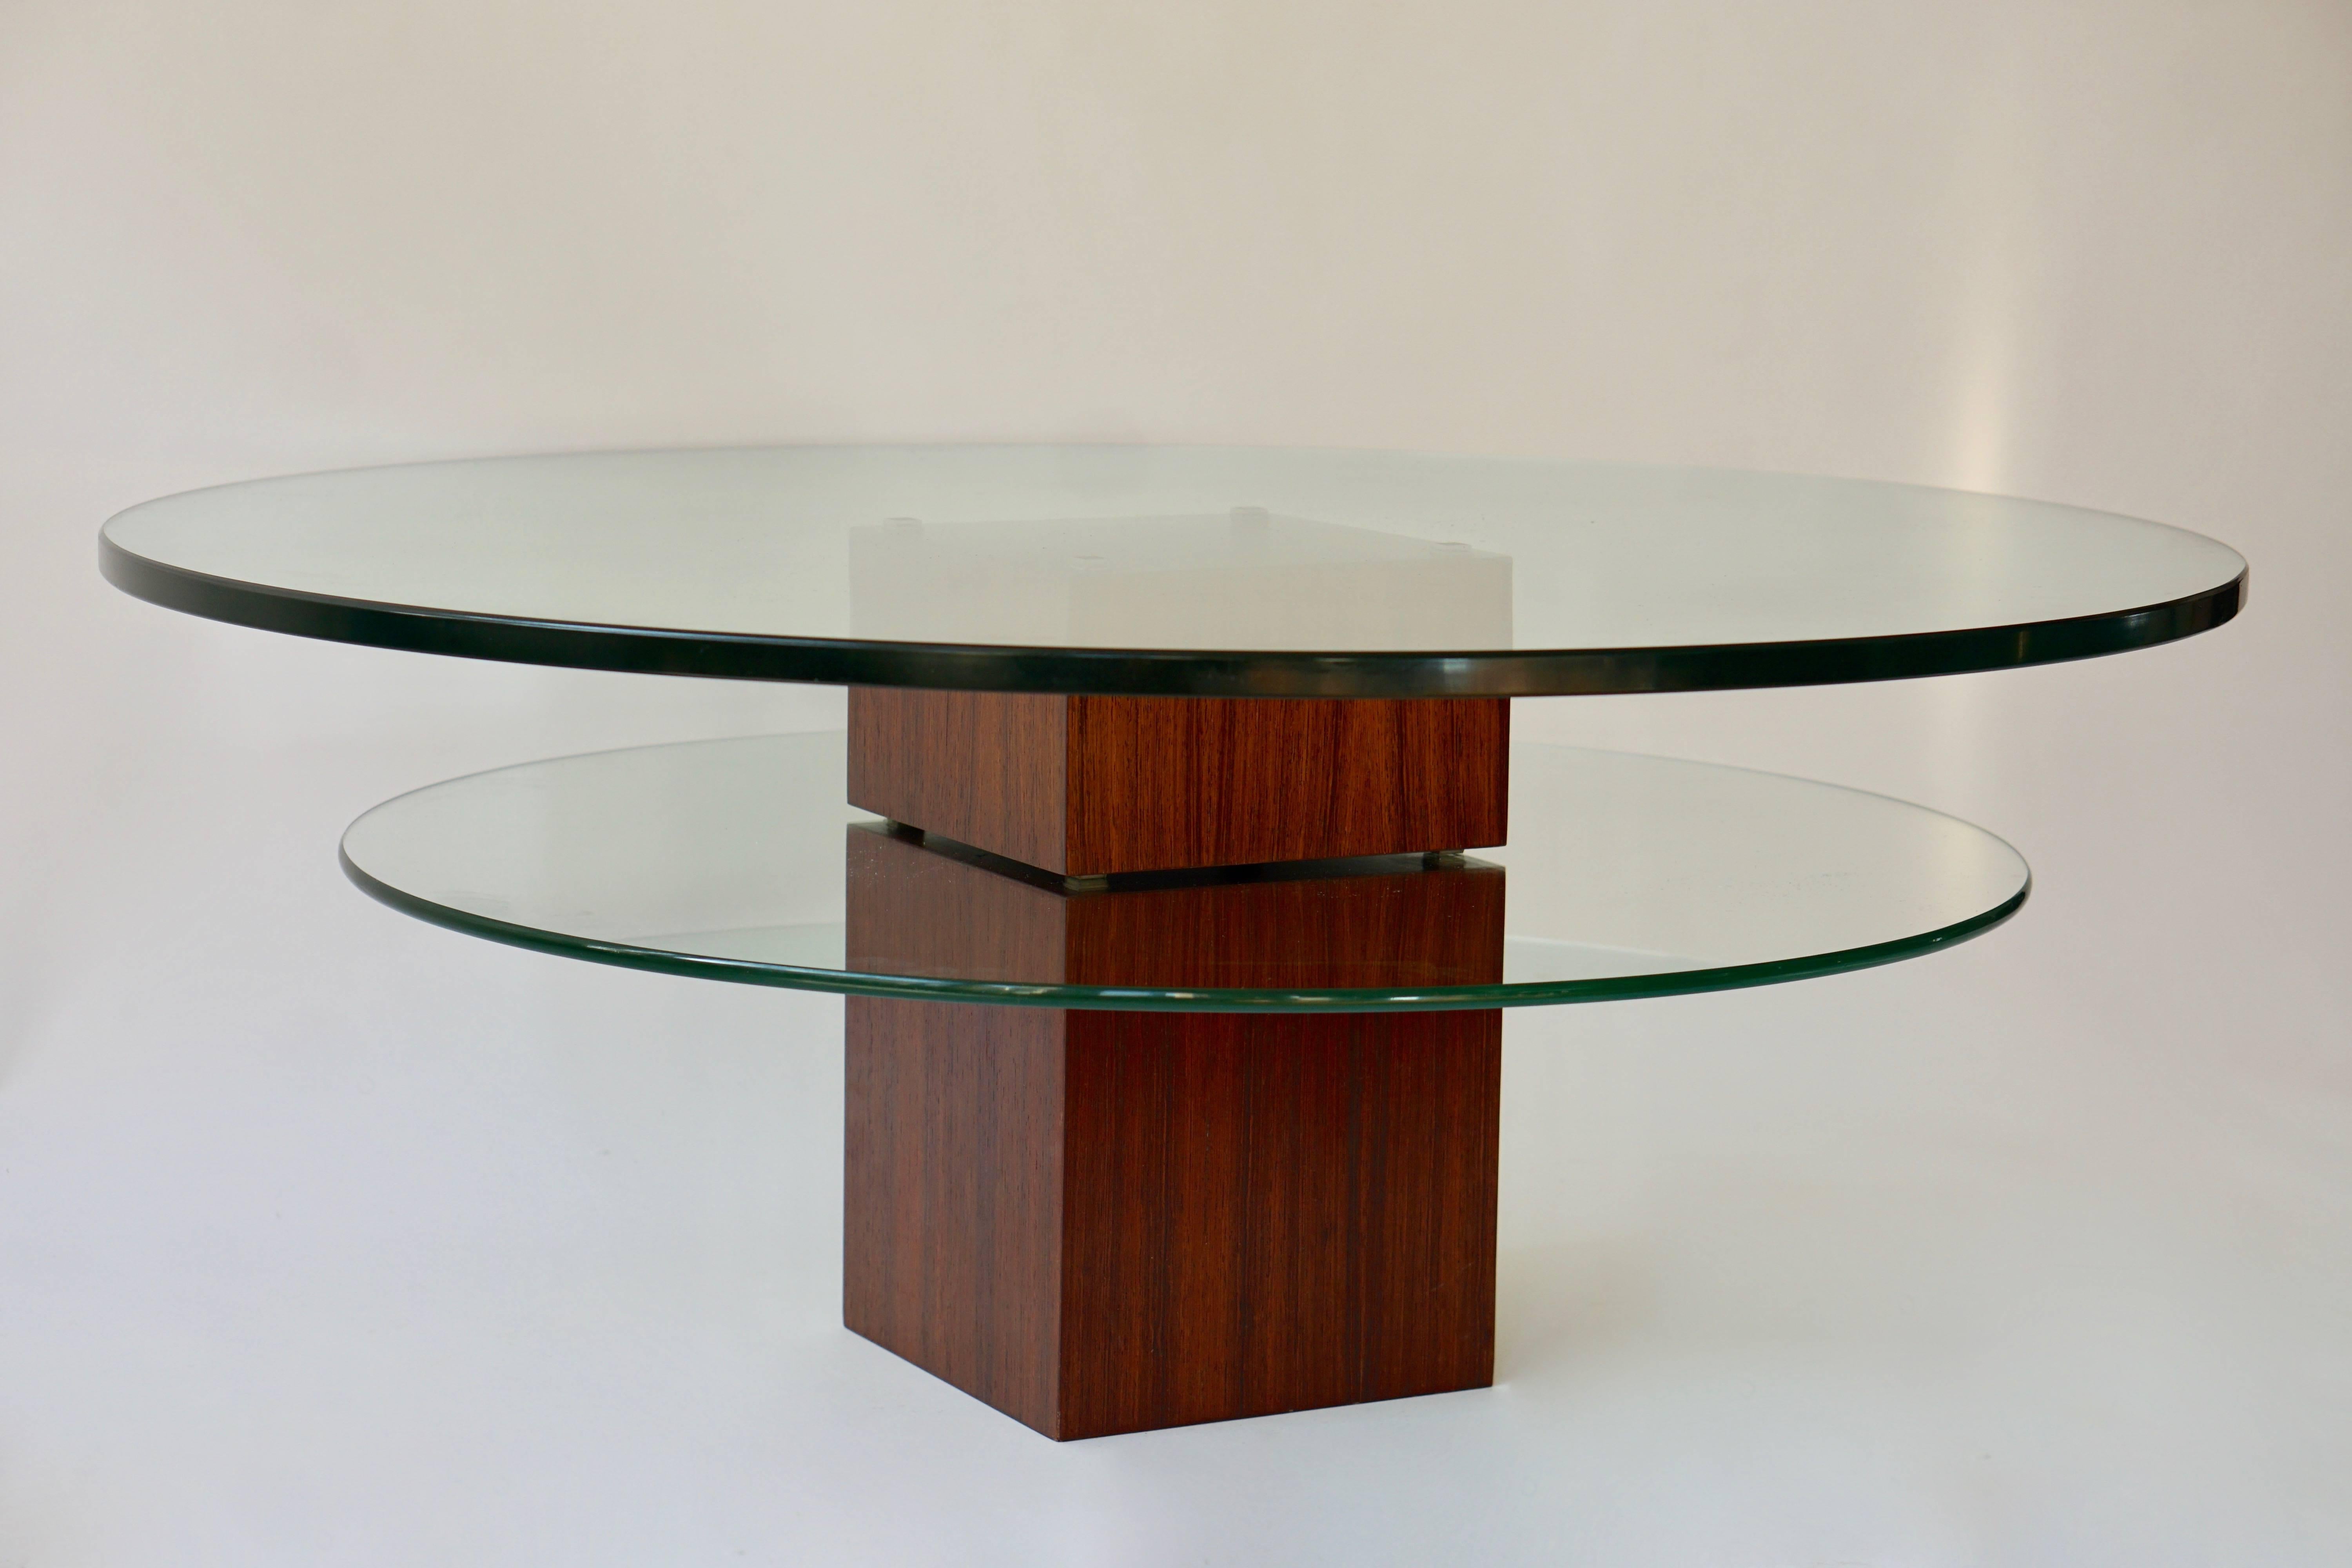 Glass coffee table with wooden base.
Diameter:100 cm.
Height:40 cm.